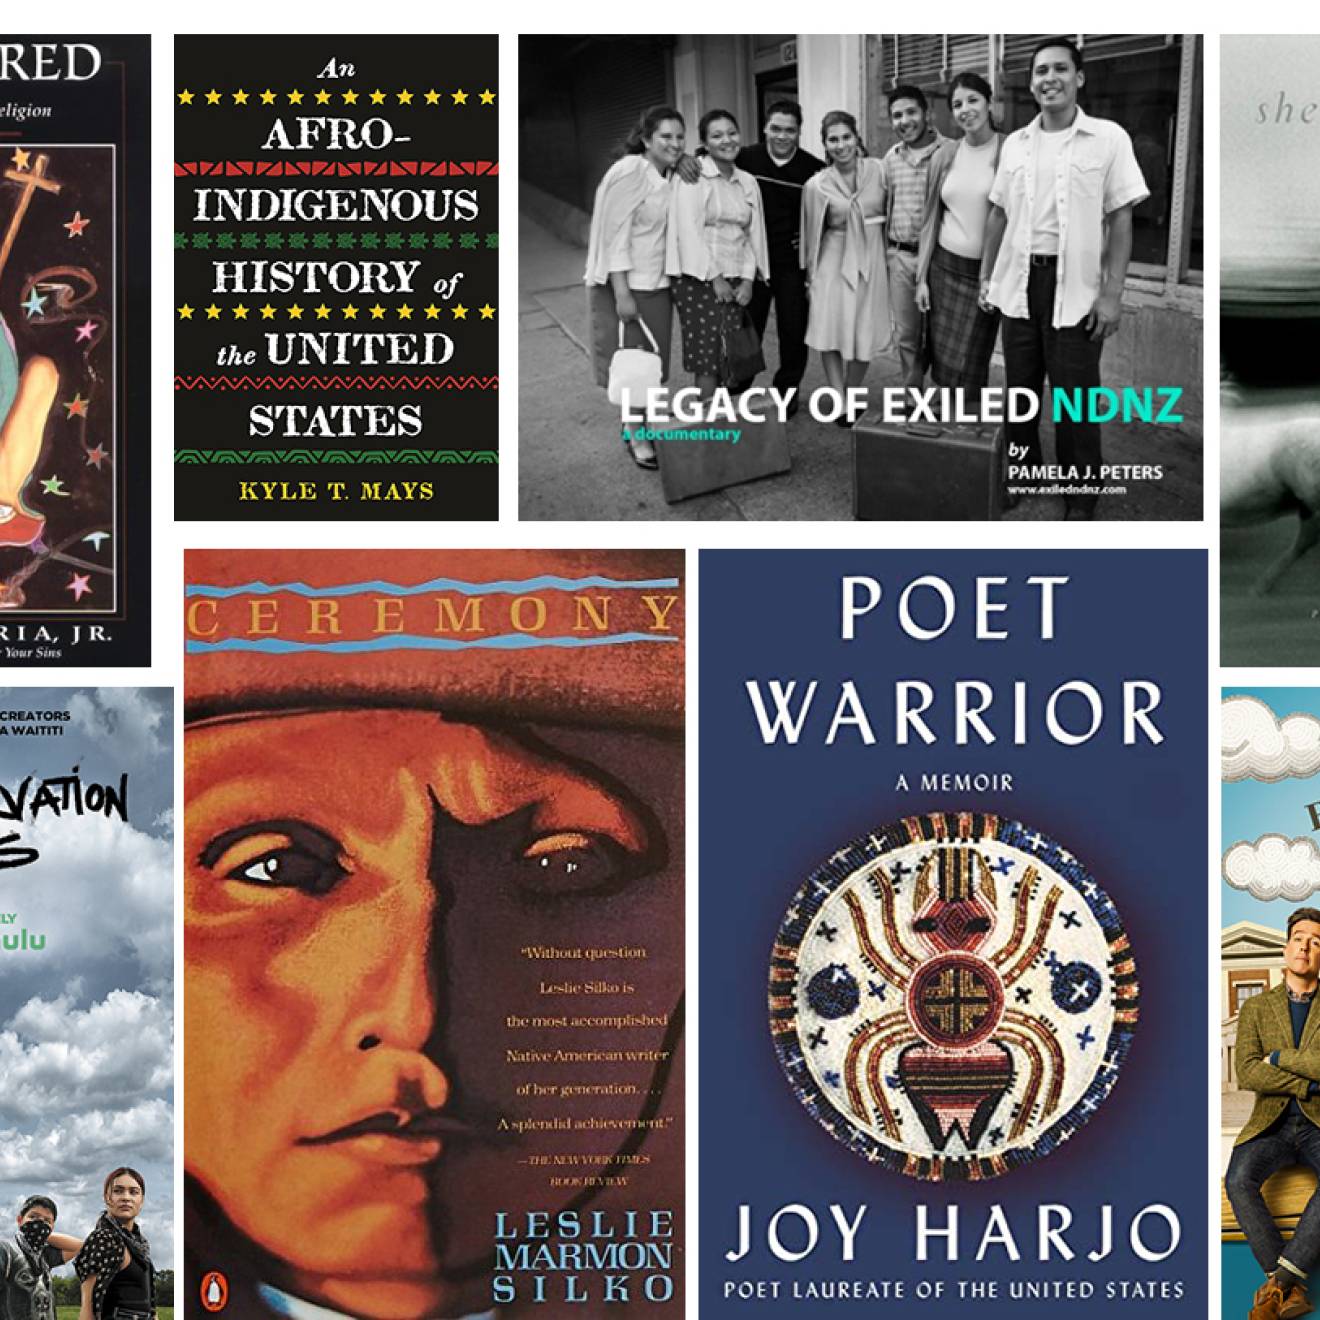 Collage of books, movies, CDs that feature Native American artists